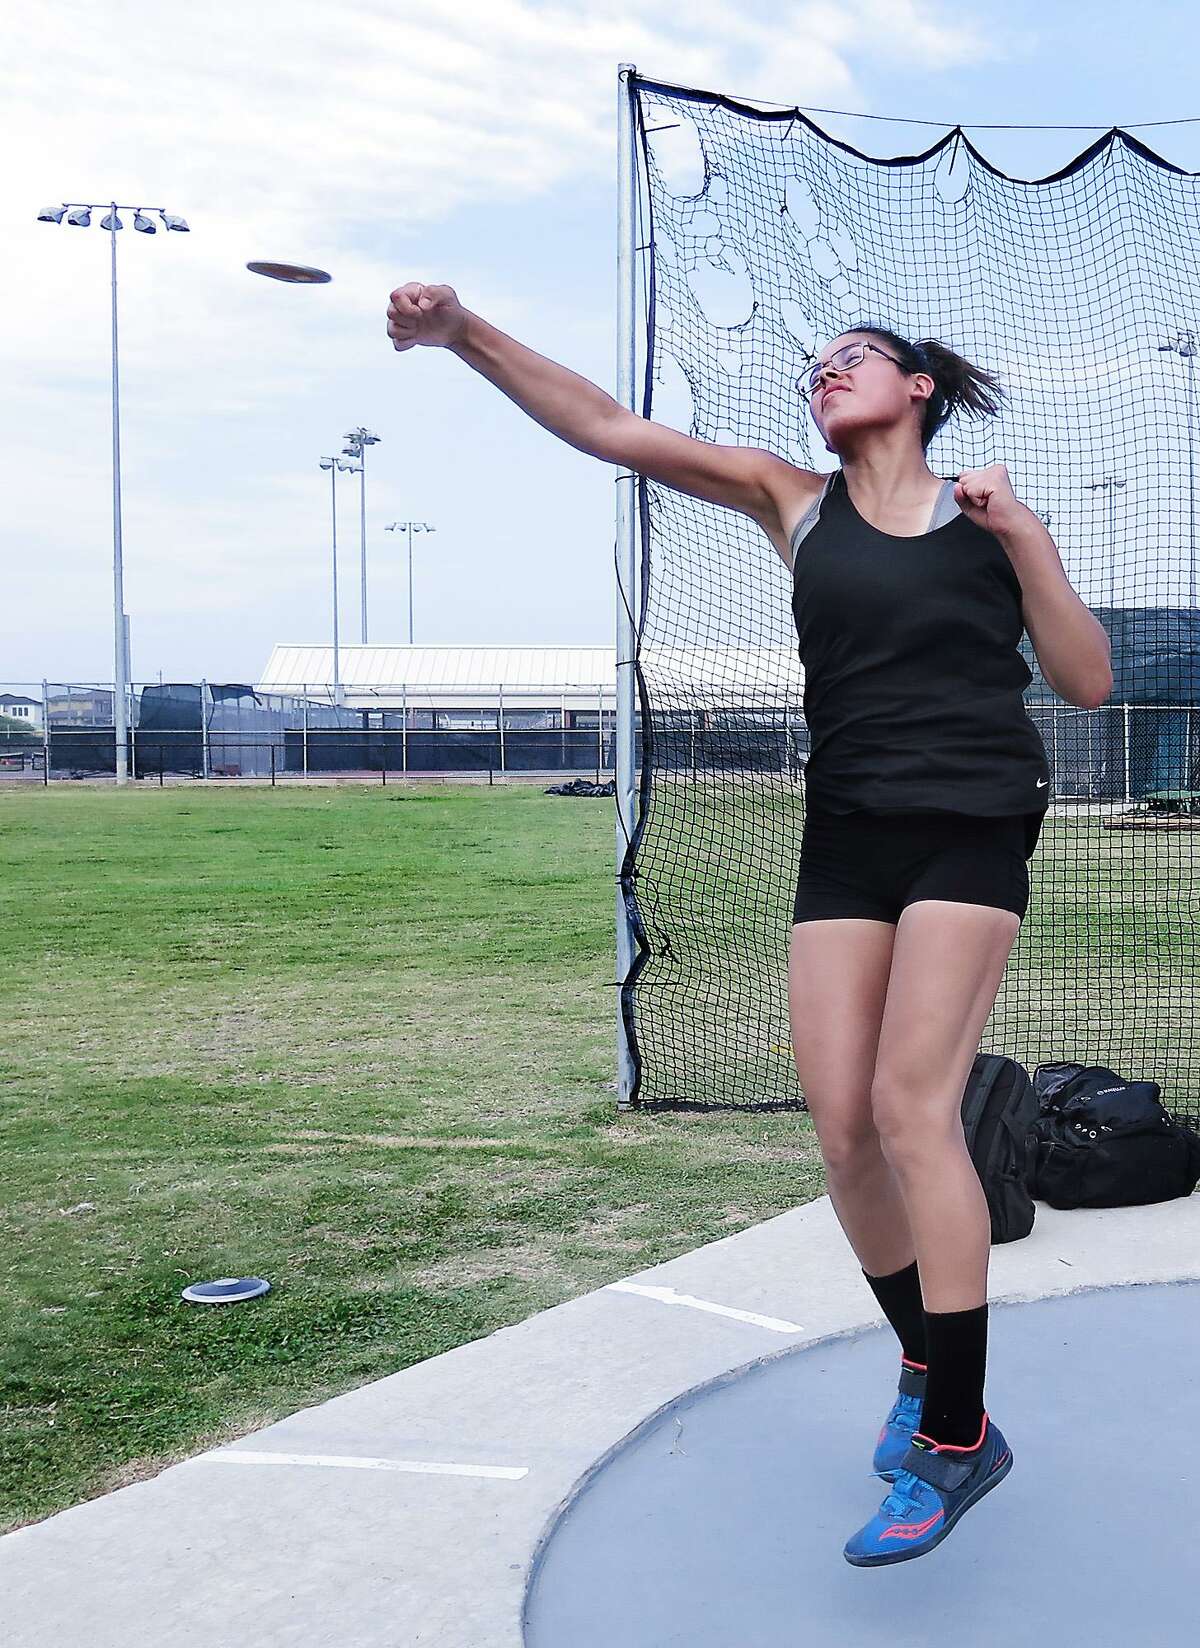 United’s Sadey Rodriguez heads to the state track & field meet in Austin for the second straight season.